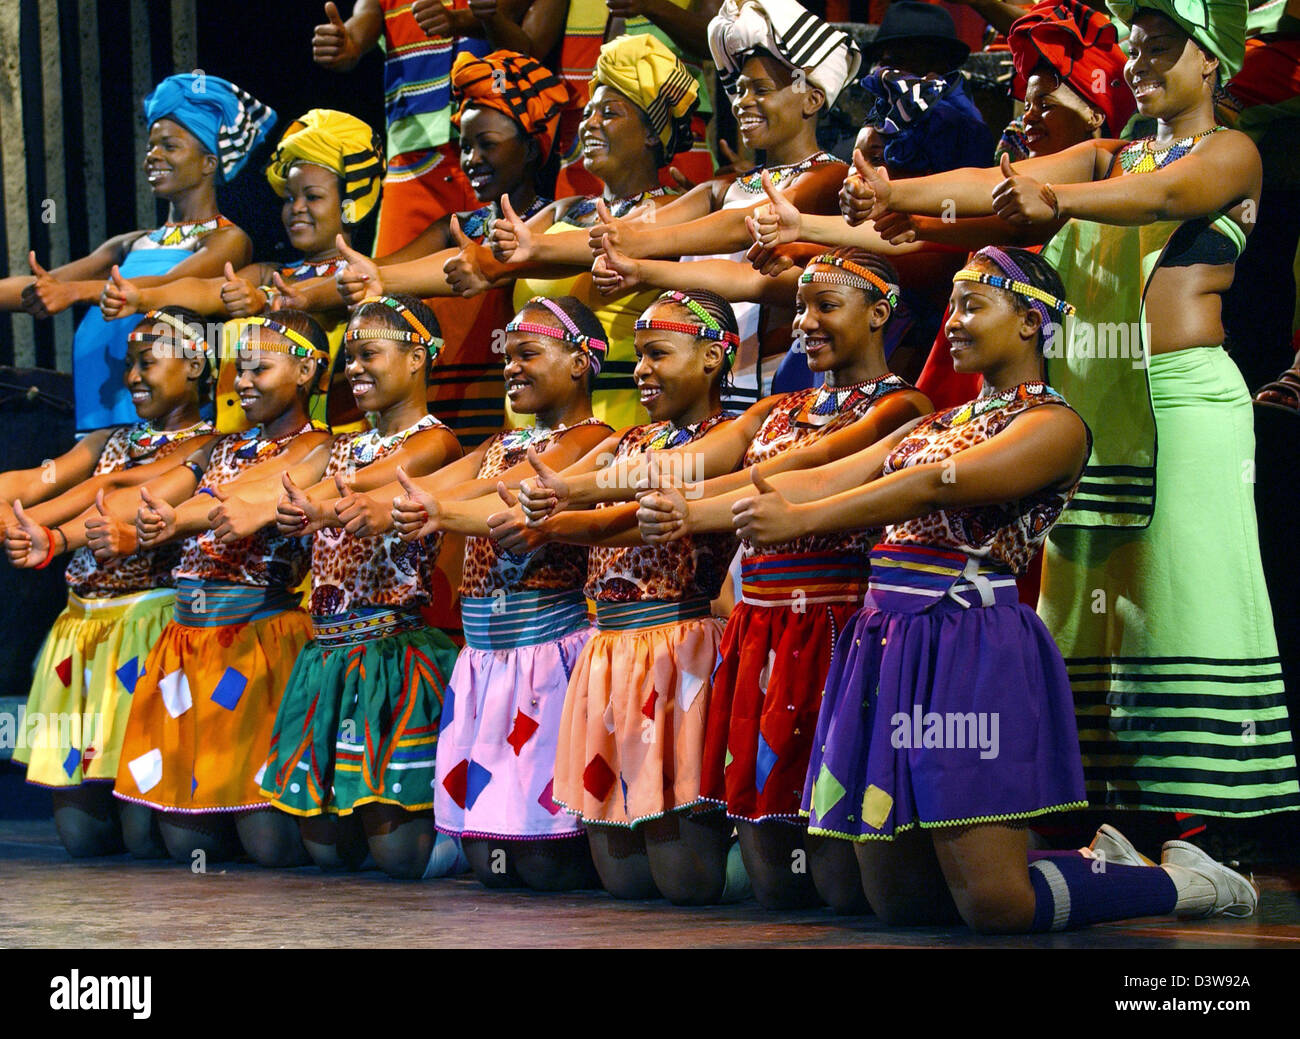 Dancers of the energetic South African show 'UMOJA - The Spirit of Togetherness' perform during the dress rehearsal in Duesseldorf, Germany, Wednesday, 24 January 2007. The show is running in Duesseldorf from 23 January to 04 February 2007. Photo: Horst Ossinger Stock Photo